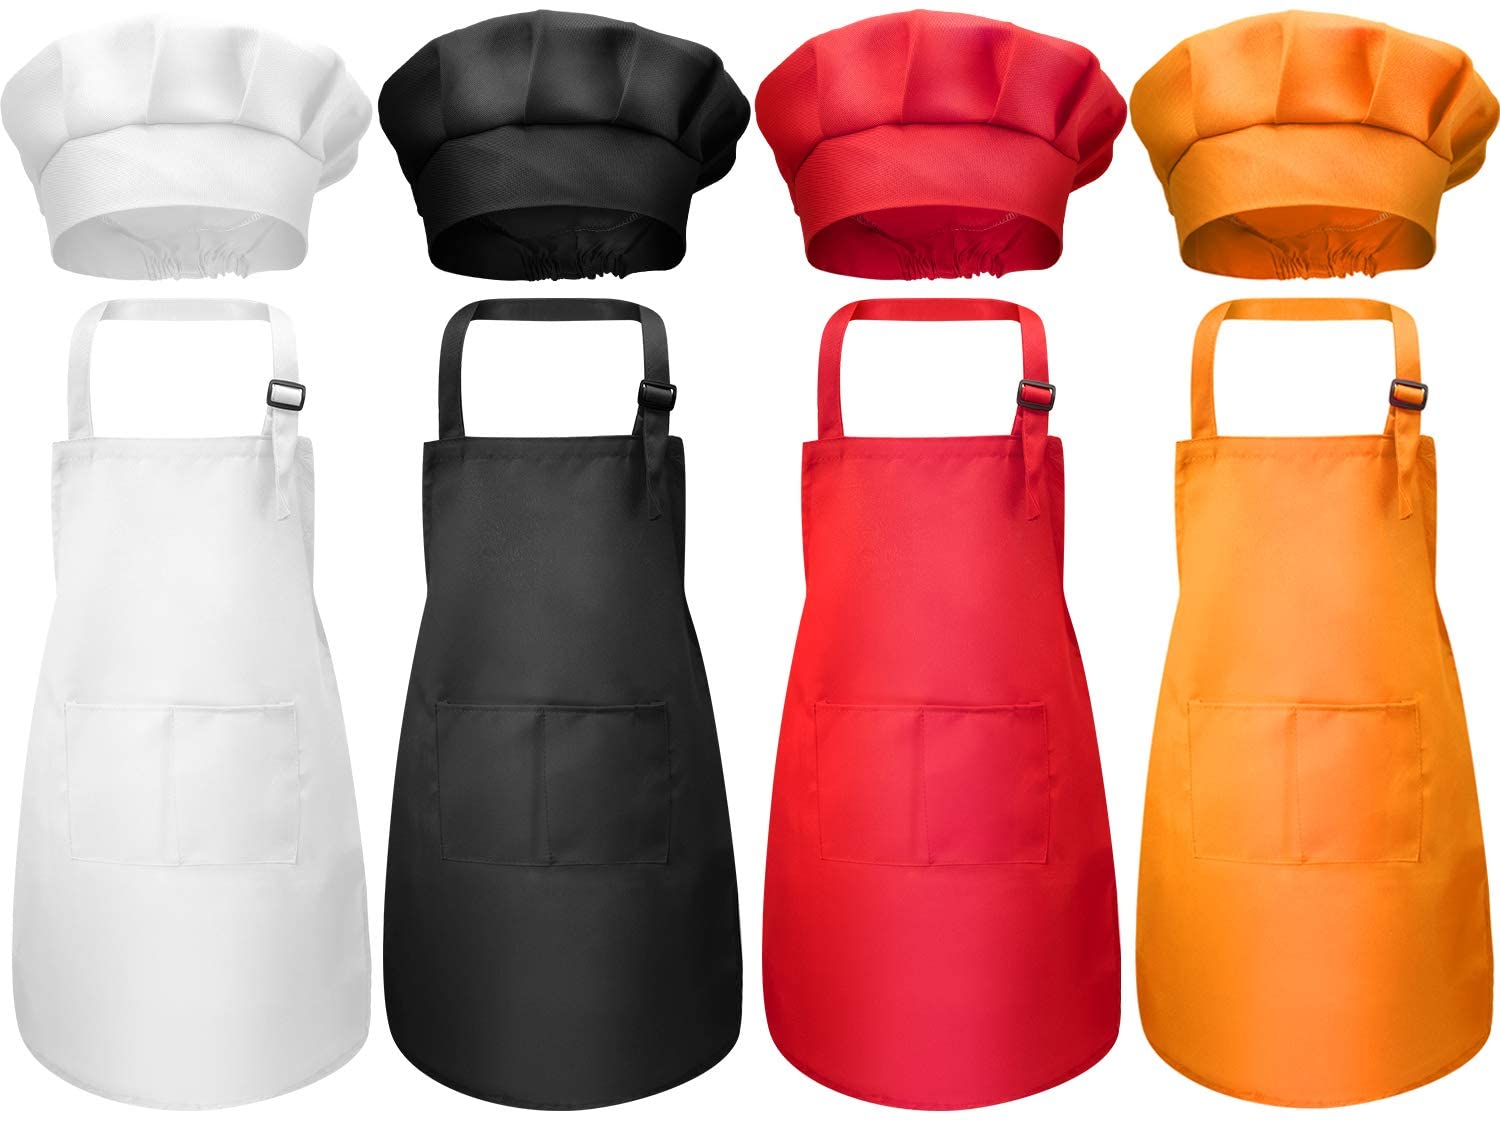 Children’s Apron with Chef Hat